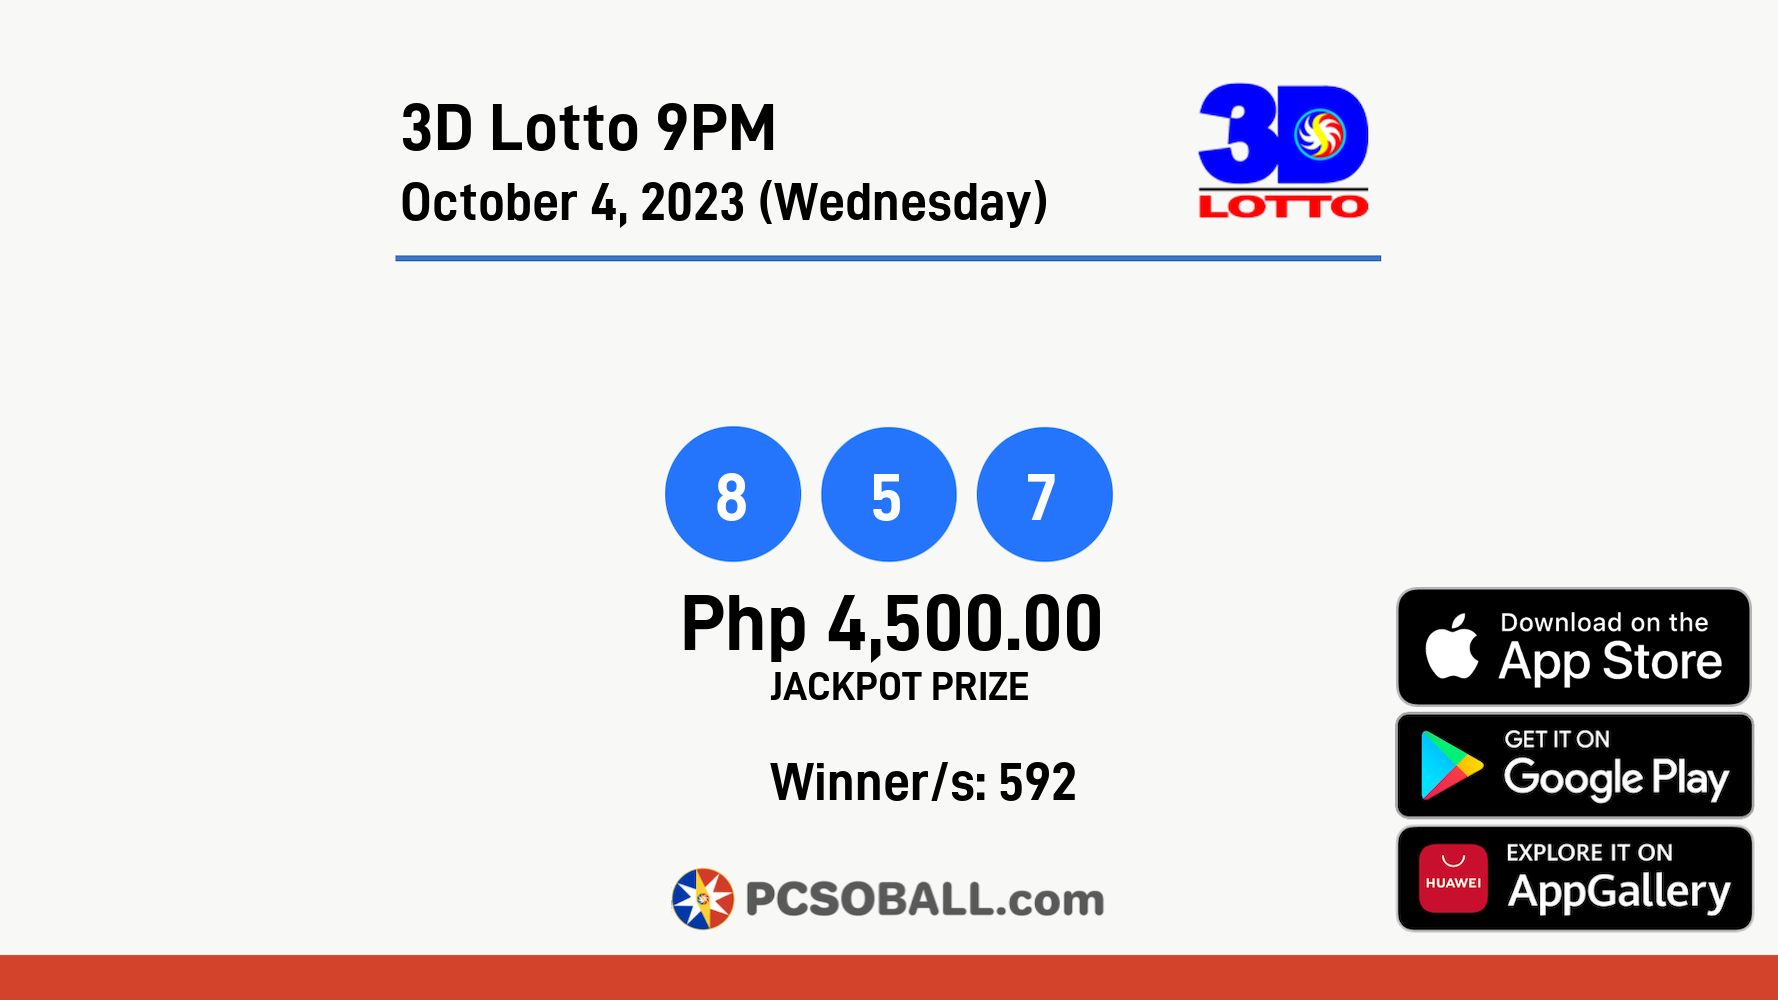 3D Lotto 9PM October 4, 2023 (Wednesday) Result